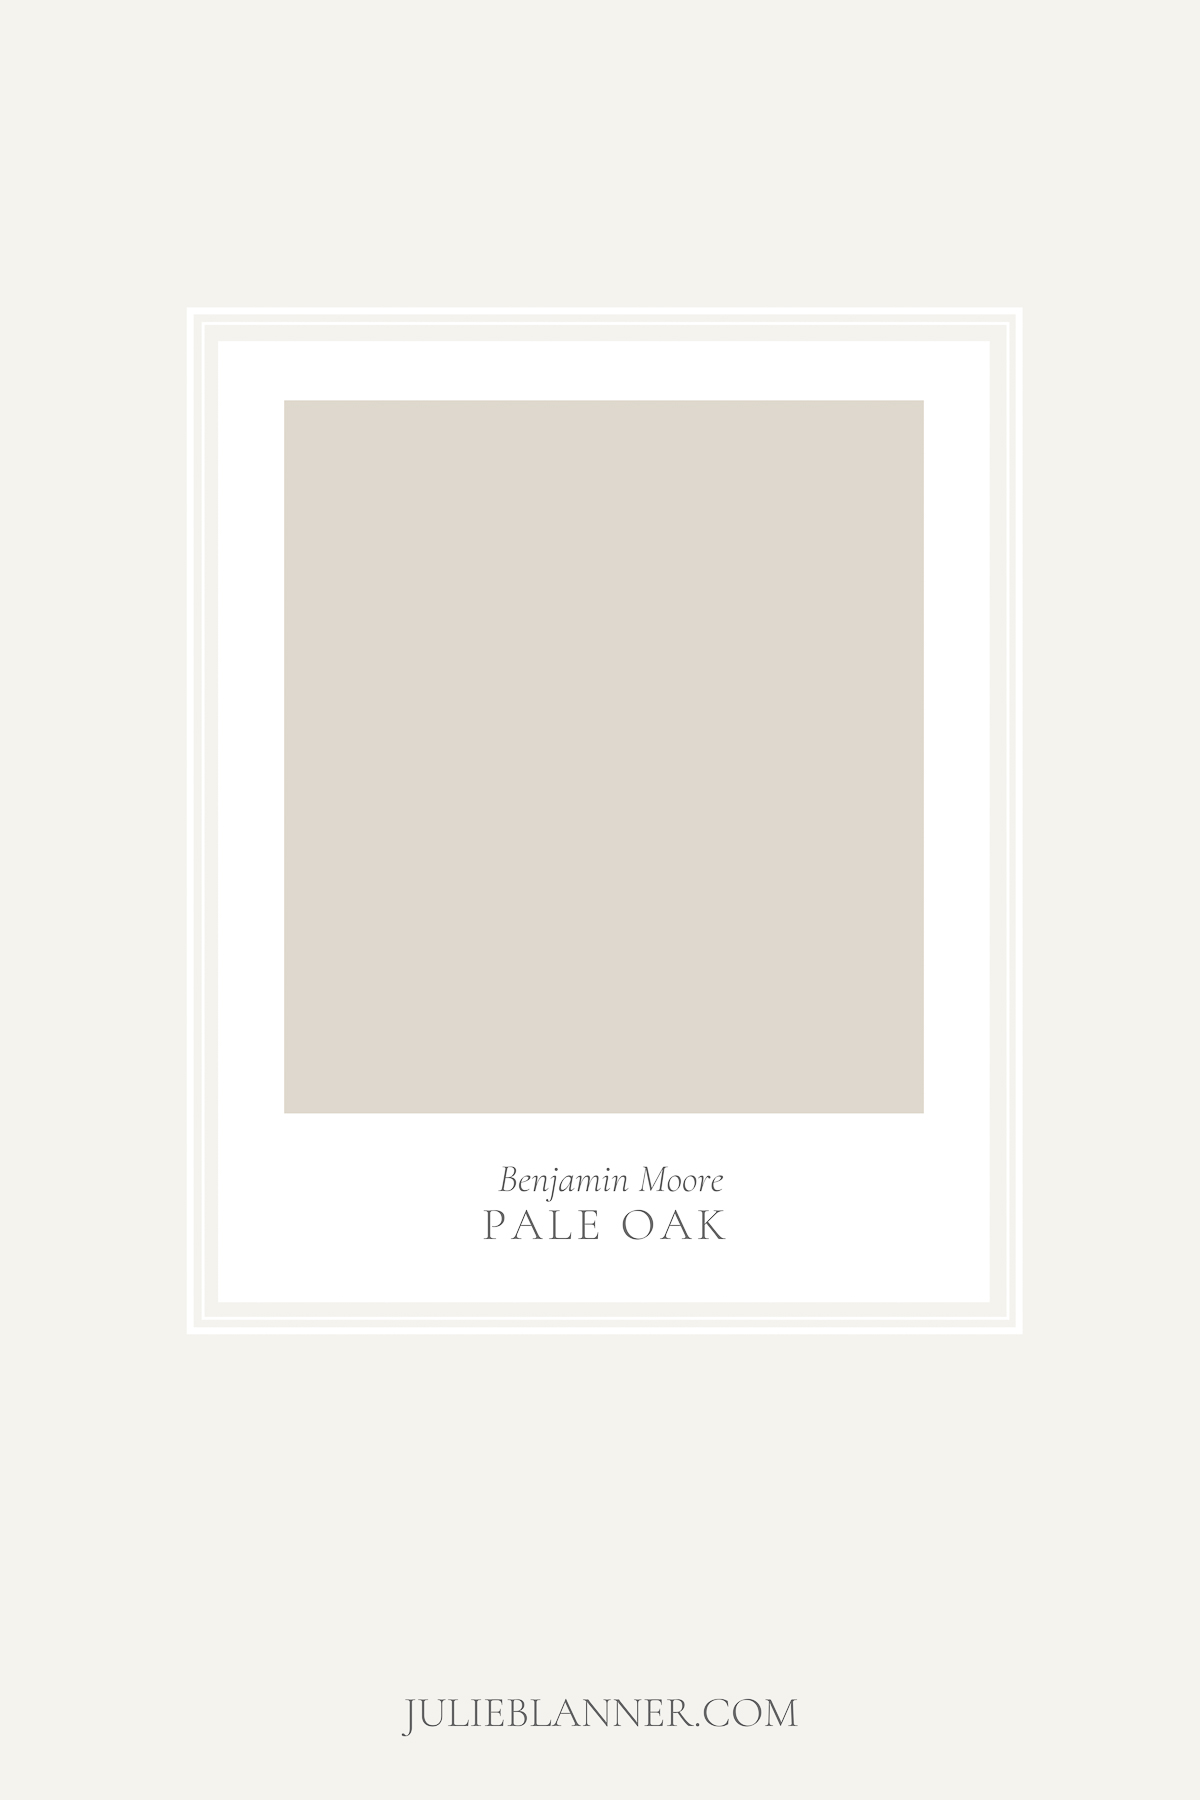 A graphic featuring a paint card for Benjamin Moore Pale Oak, a deck paint color.